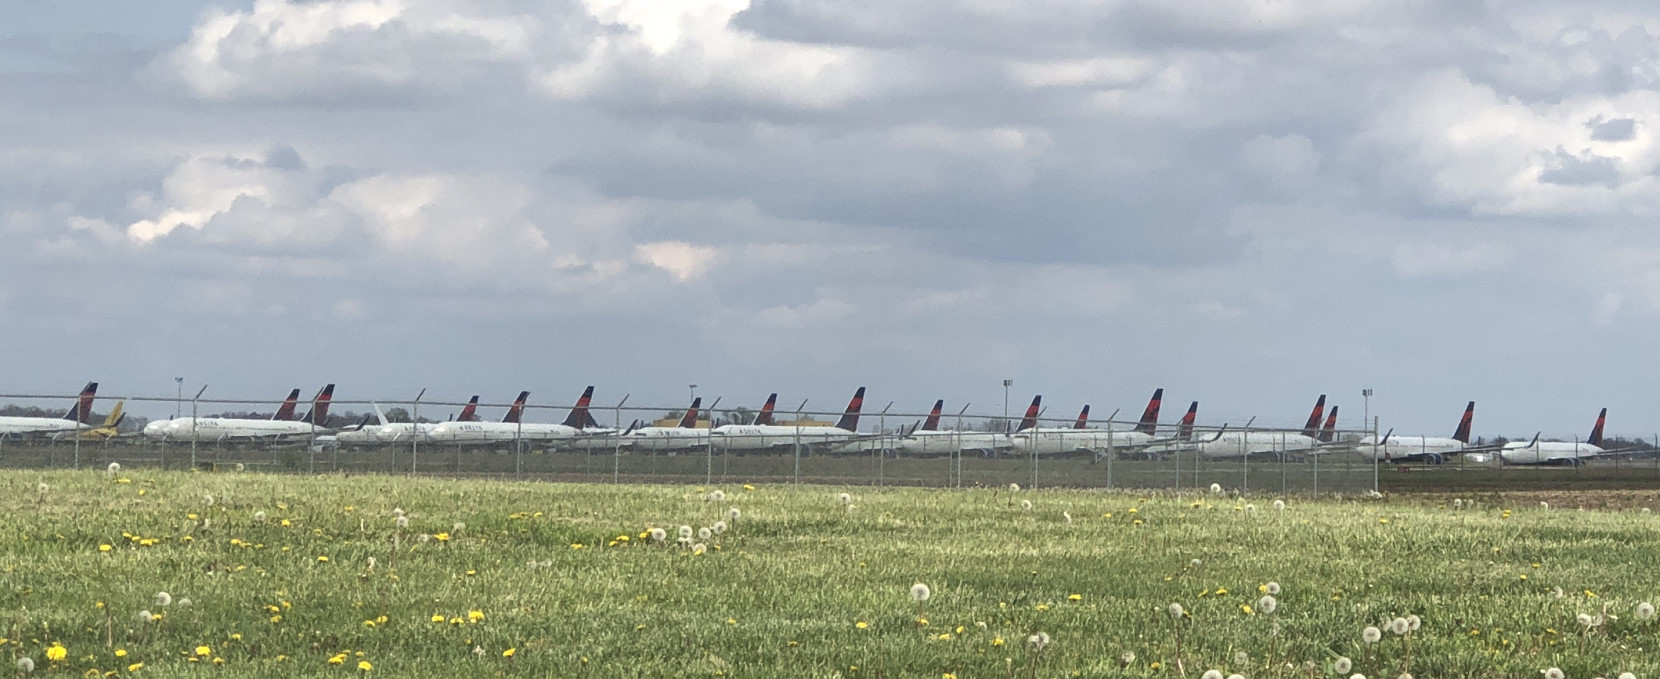 Delta jets stored at ILN